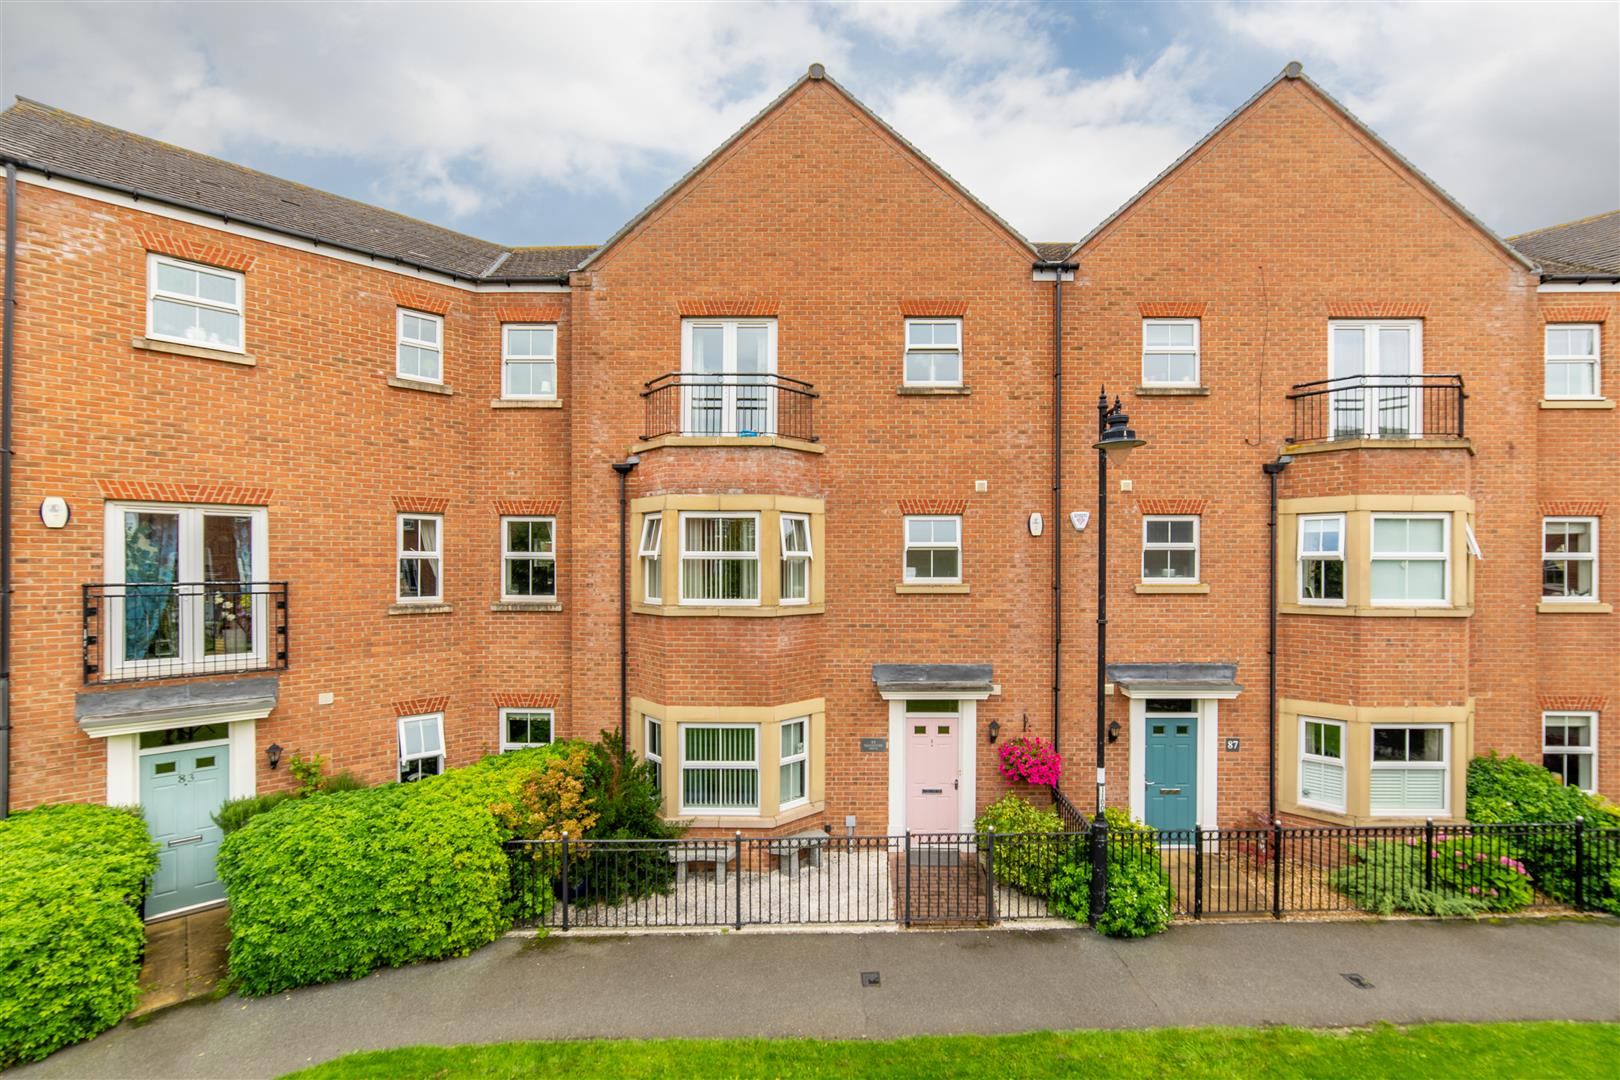 4 bed town house for sale in Featherstone Grove, Newcastle Upon Tyne, NE3 